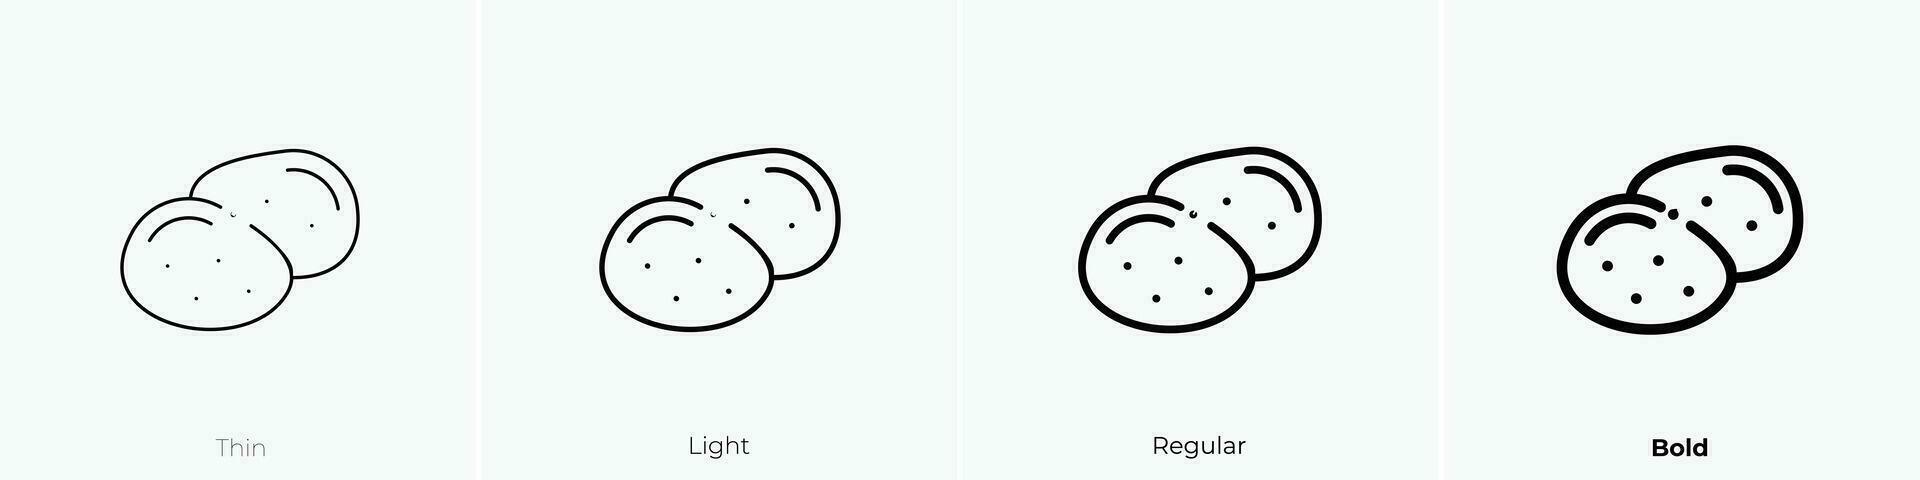 potato icon. Thin, Light, Regular And Bold style design isolated on white background vector